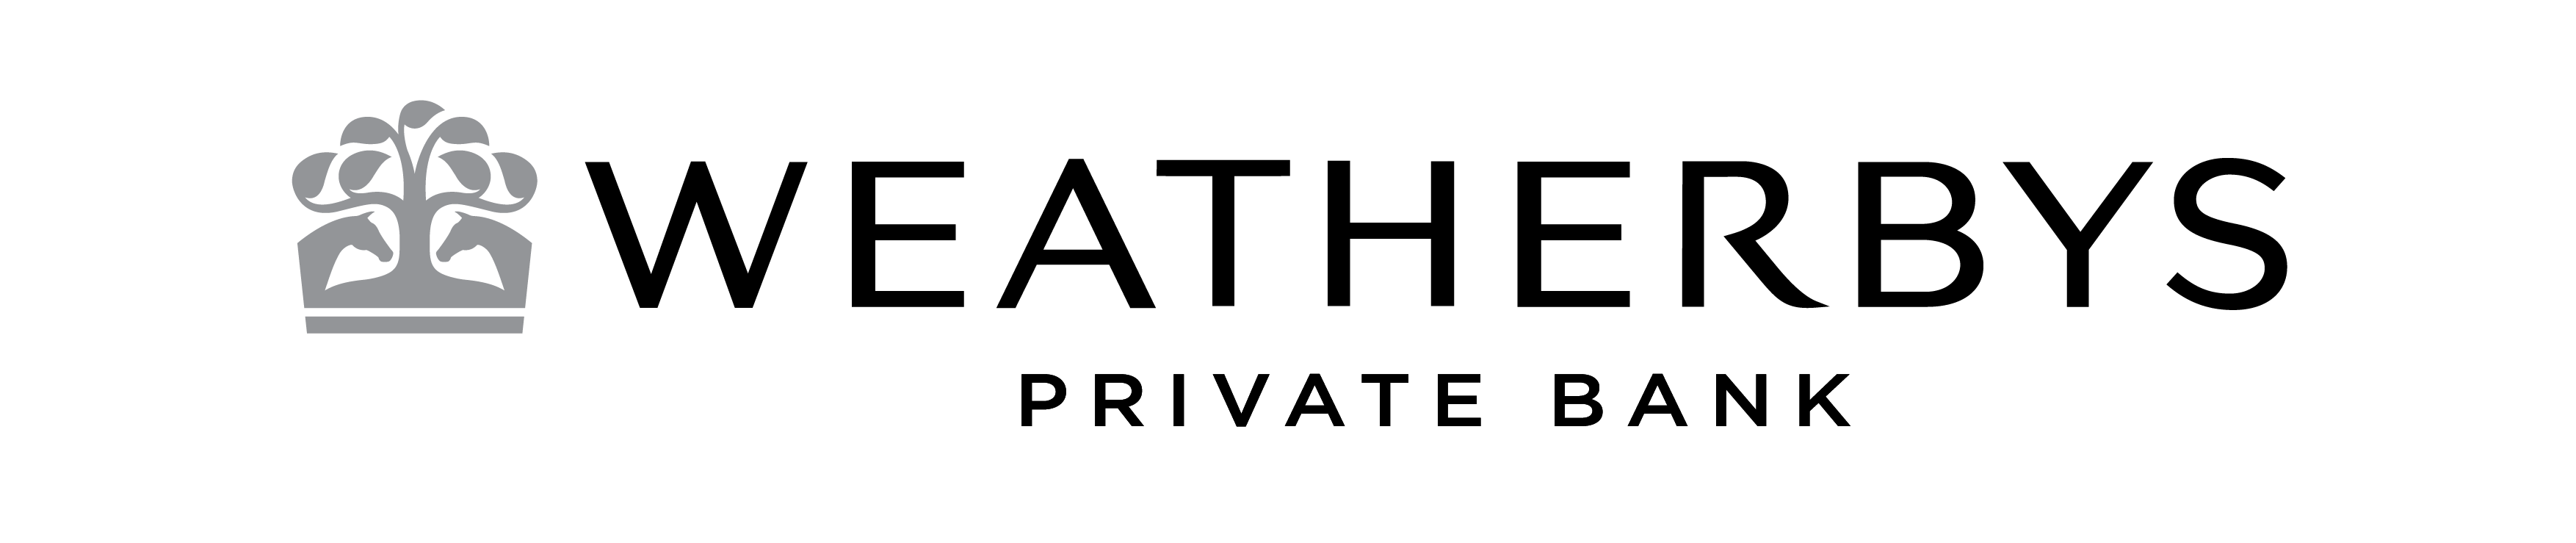 Weatherbys Private Bank  logo